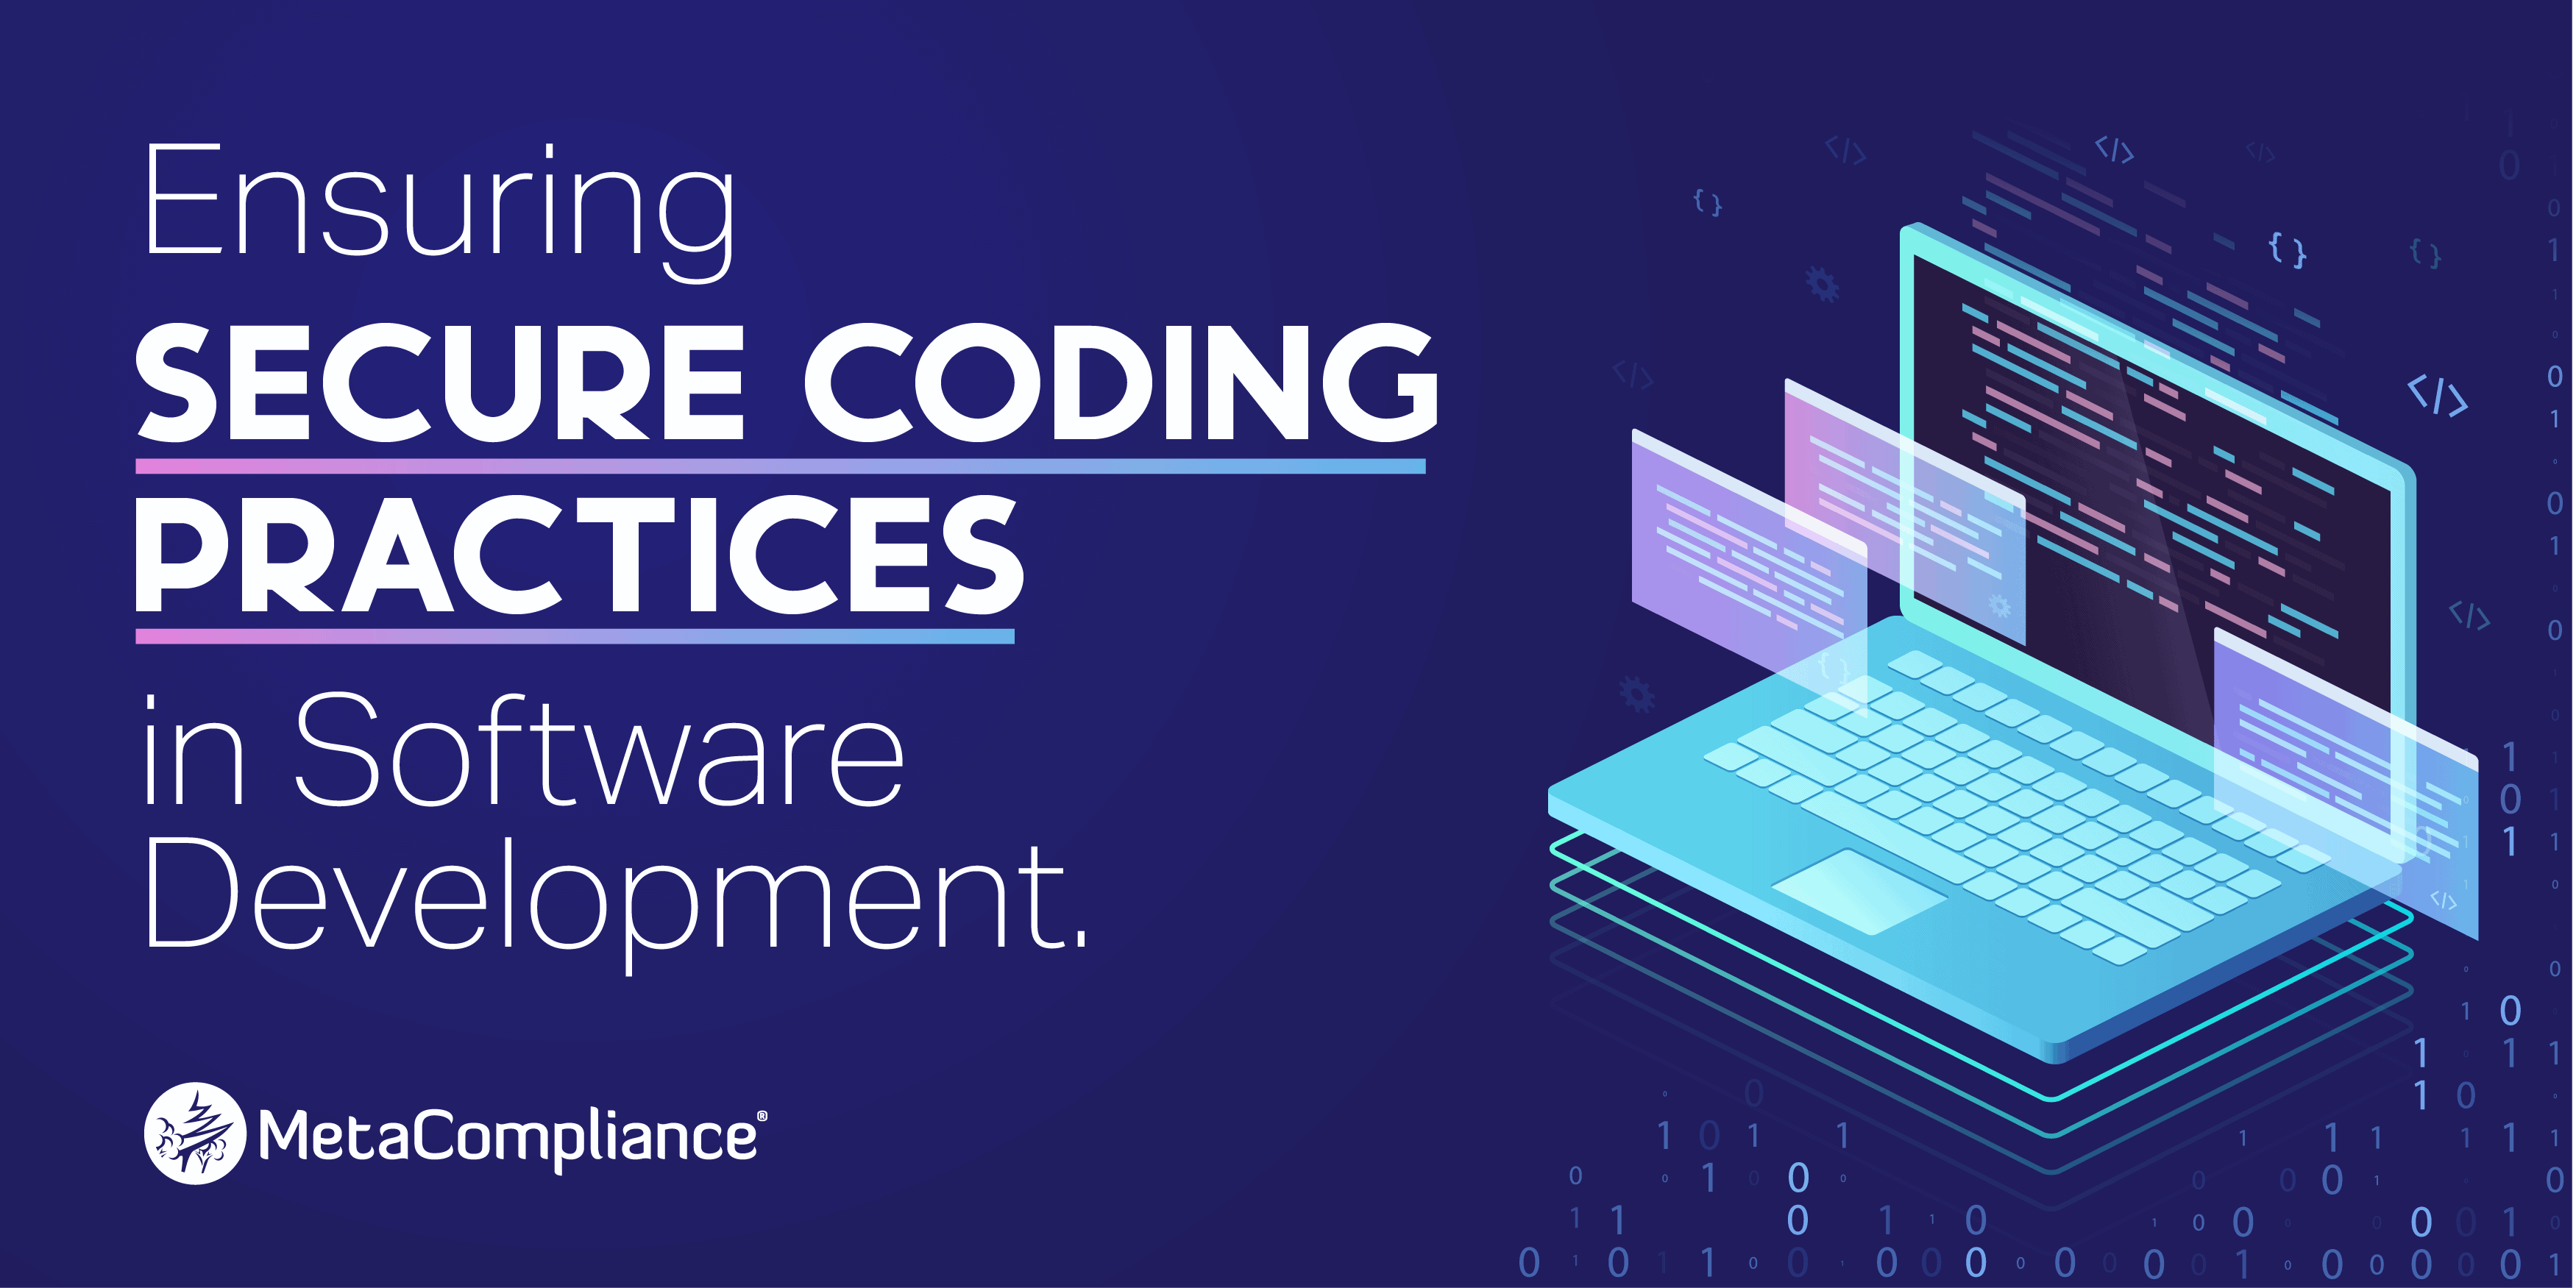 Ensuring Secure Coding Practices in Software Development